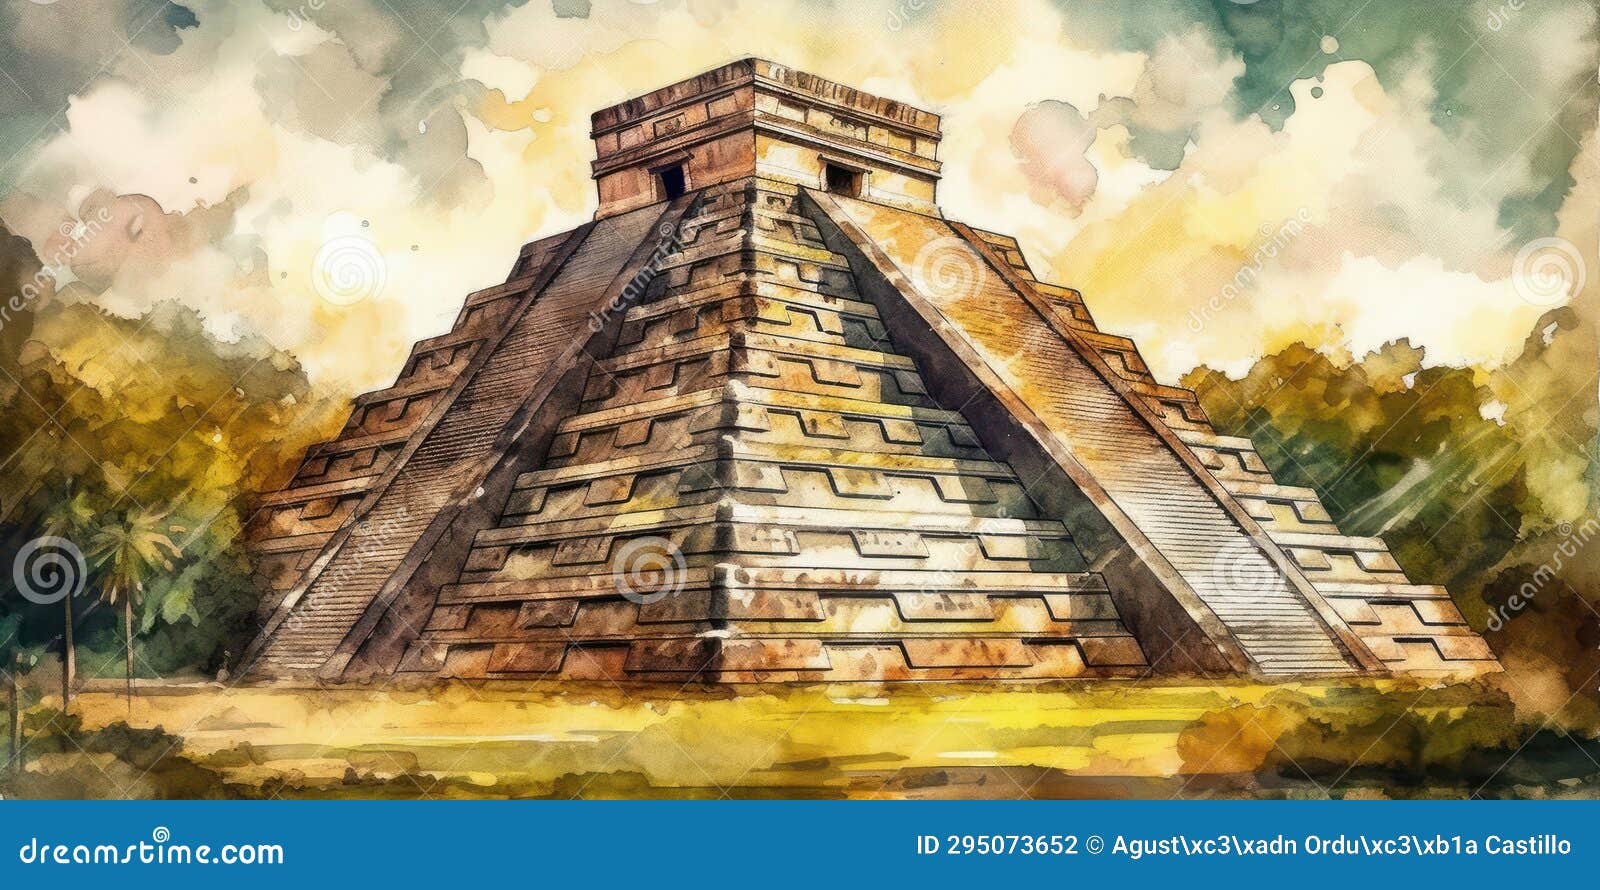 watercolor drawing of the chichen itza monument of the mayans.